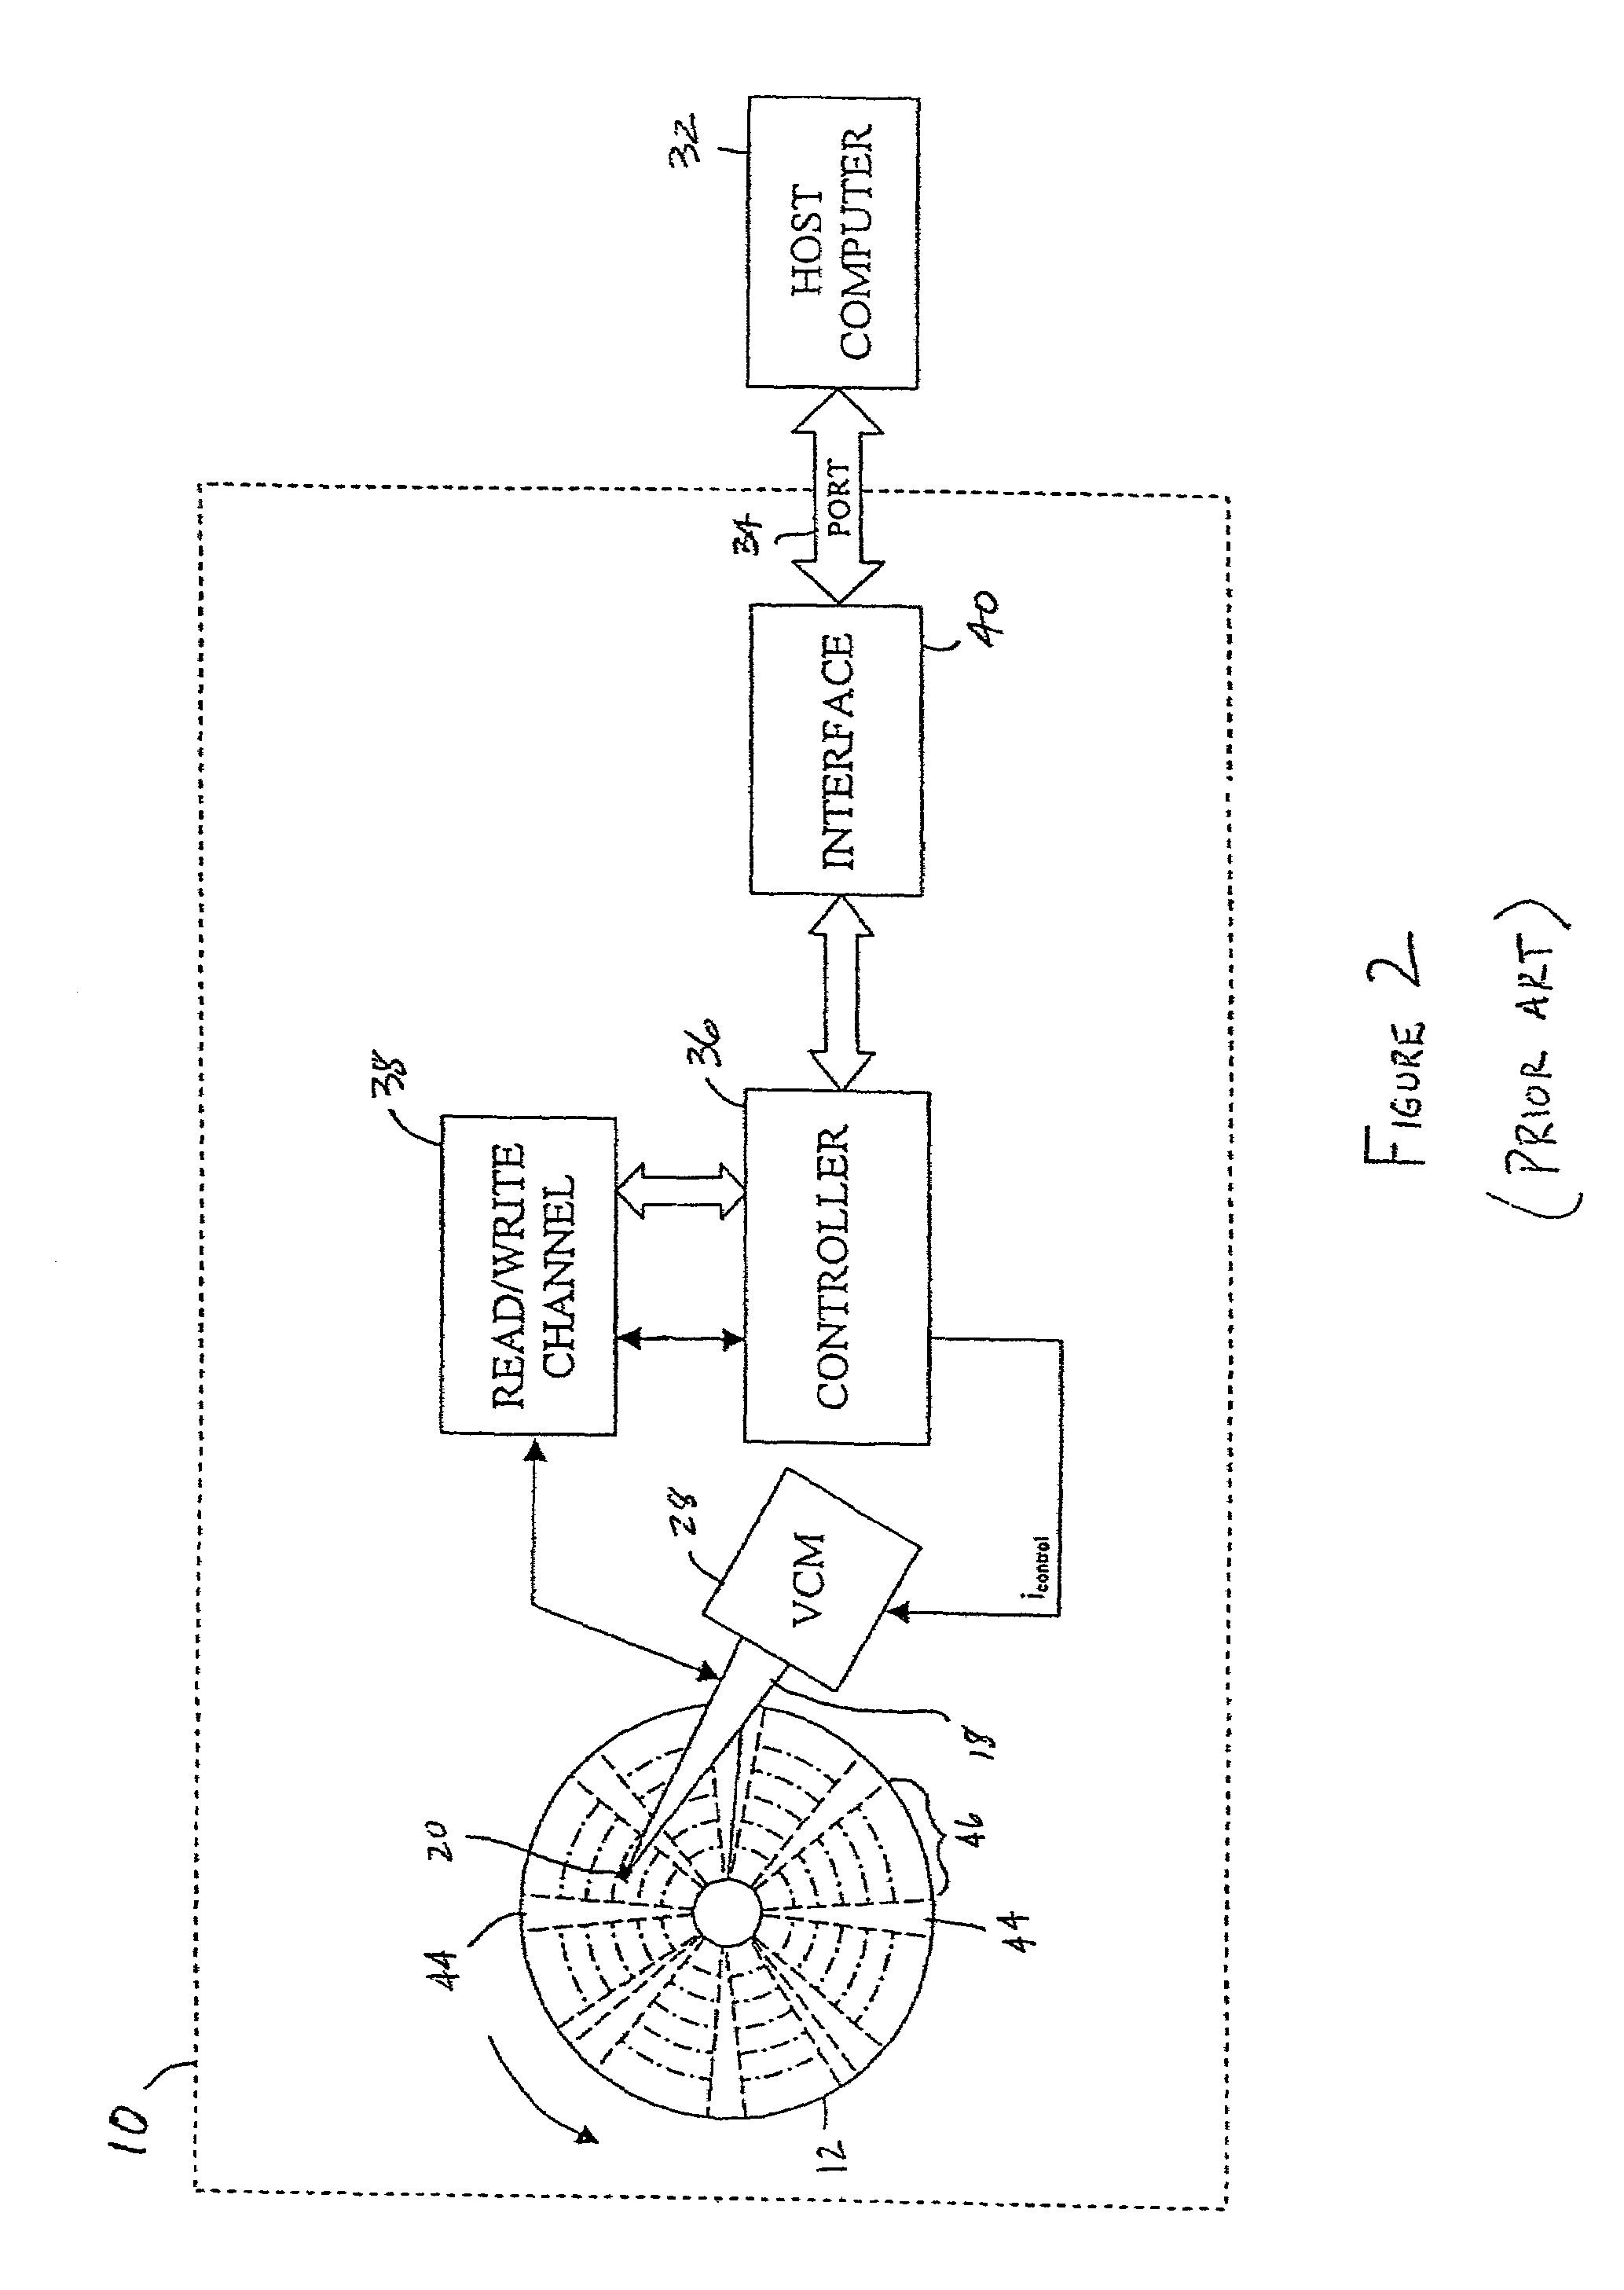 Method and apparatus for writing and reading servo information written in a spiral fashion